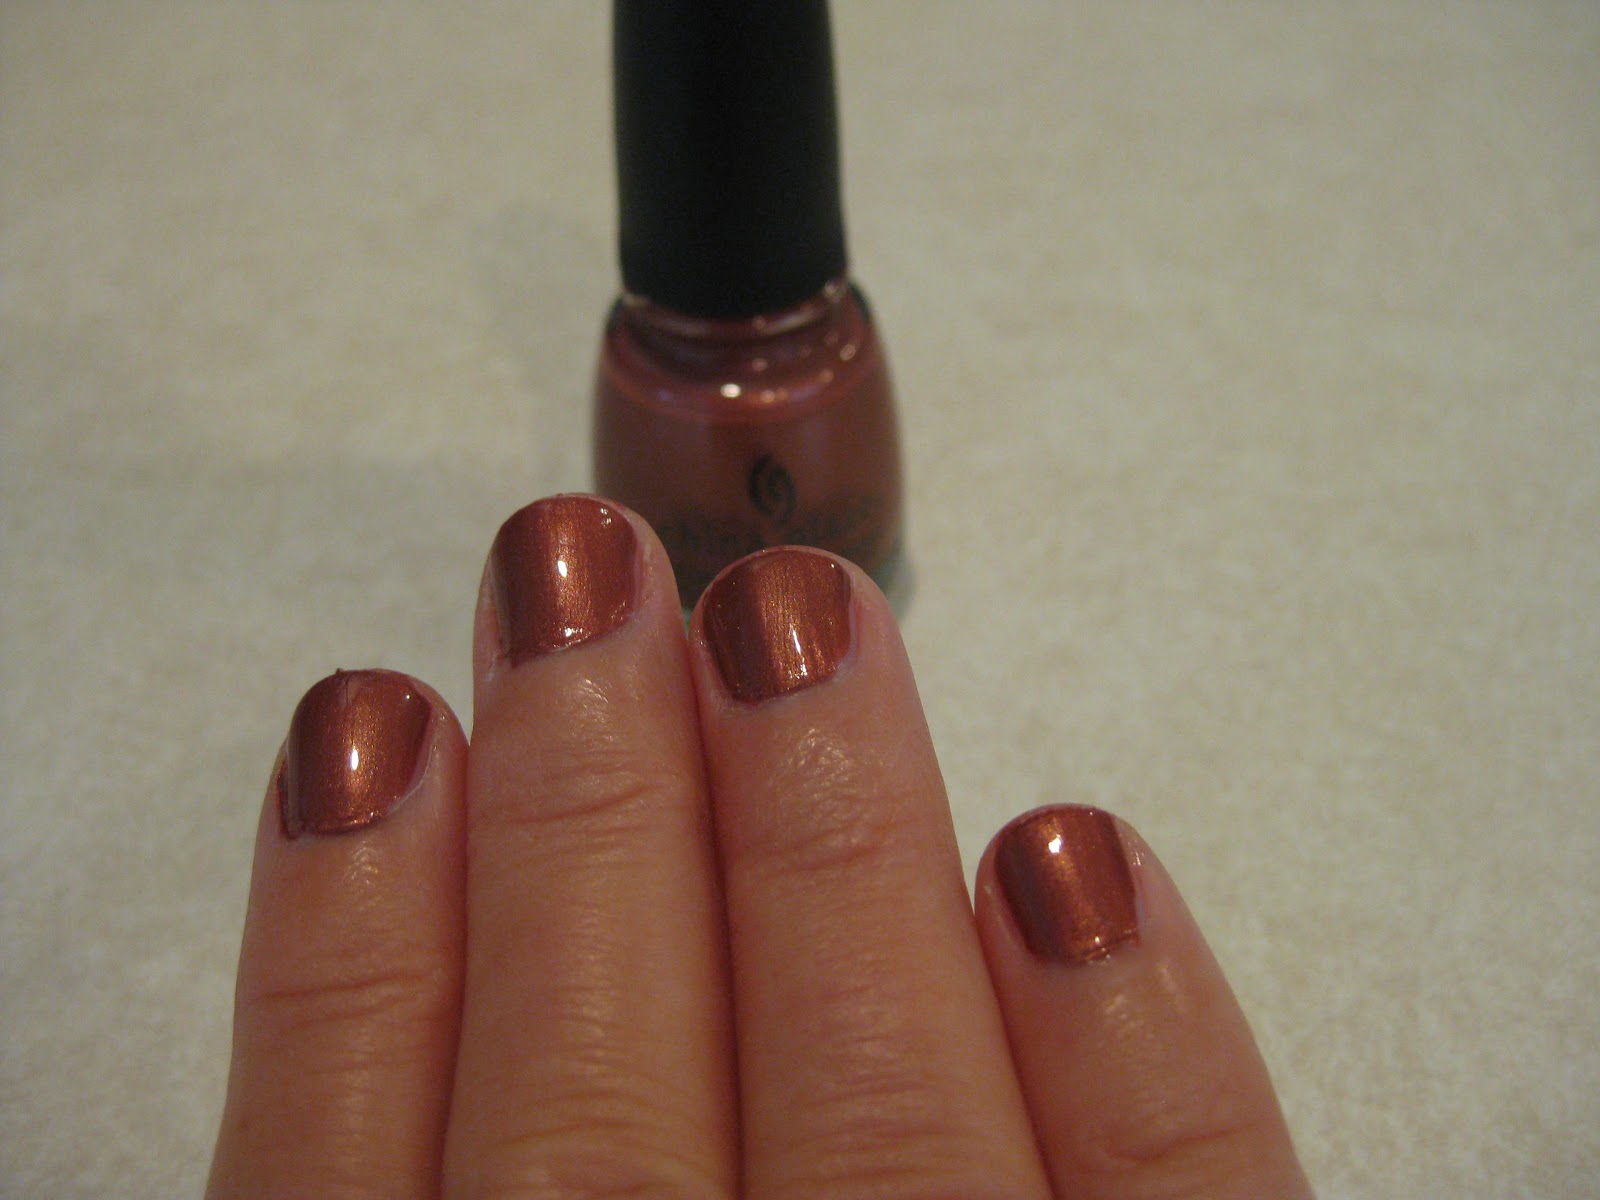 4. China Glaze Nail Lacquer in "Feet Don't Fail Me Now" - wide 11